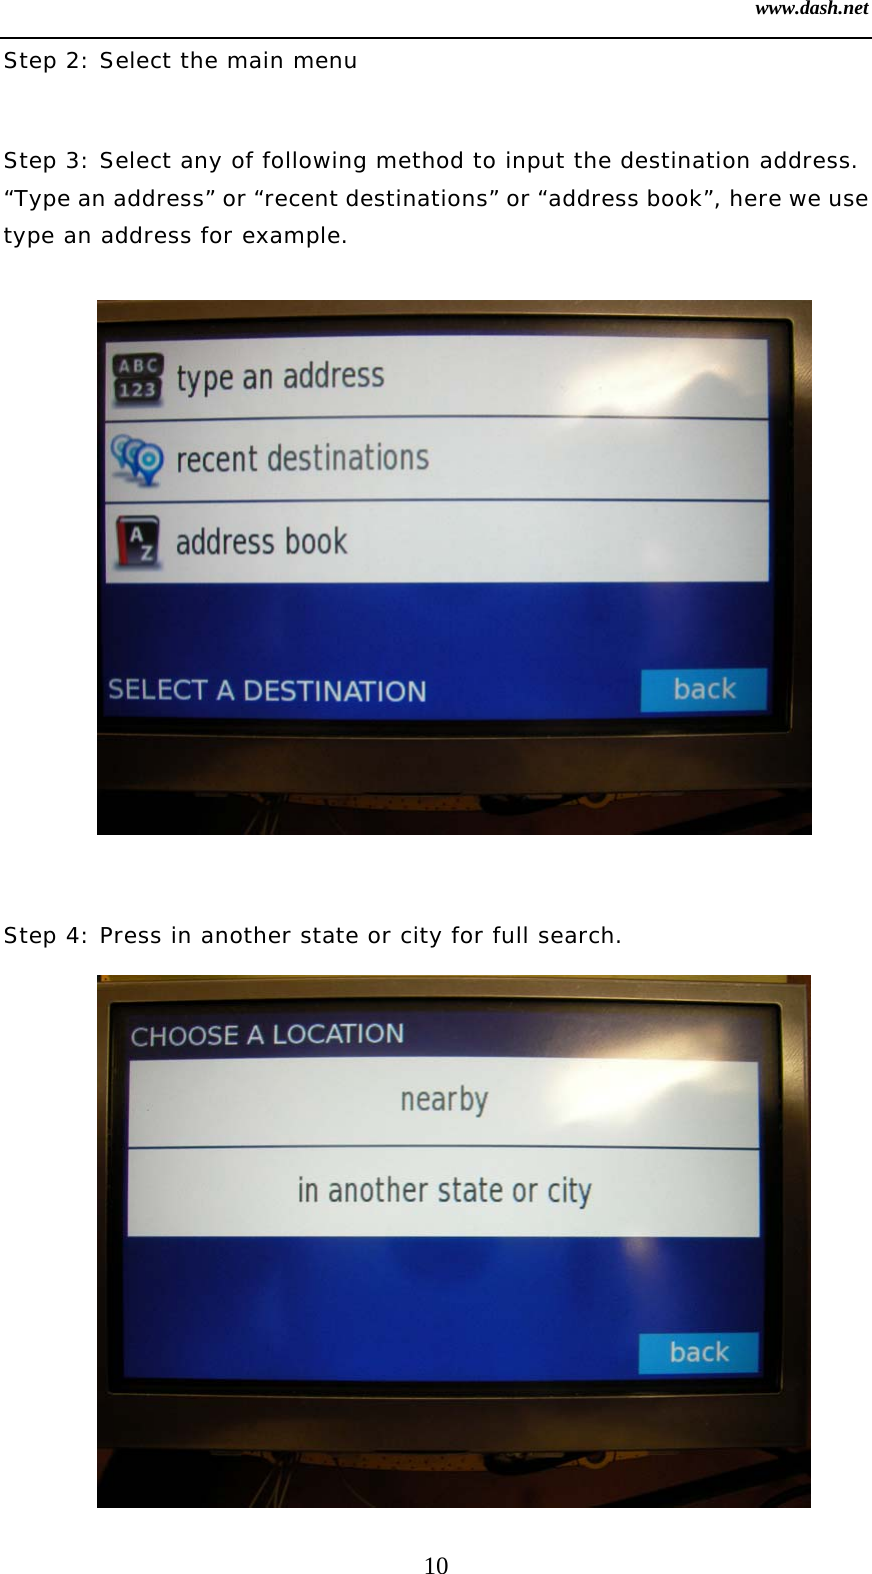 www.dash.net 10 Step 2: Select the main menu  Step 3: Select any of following method to input the destination address. “Type an address” or “recent destinations” or “address book”, here we use type an address for example.              Step 4: Press in another state or city for full search.   